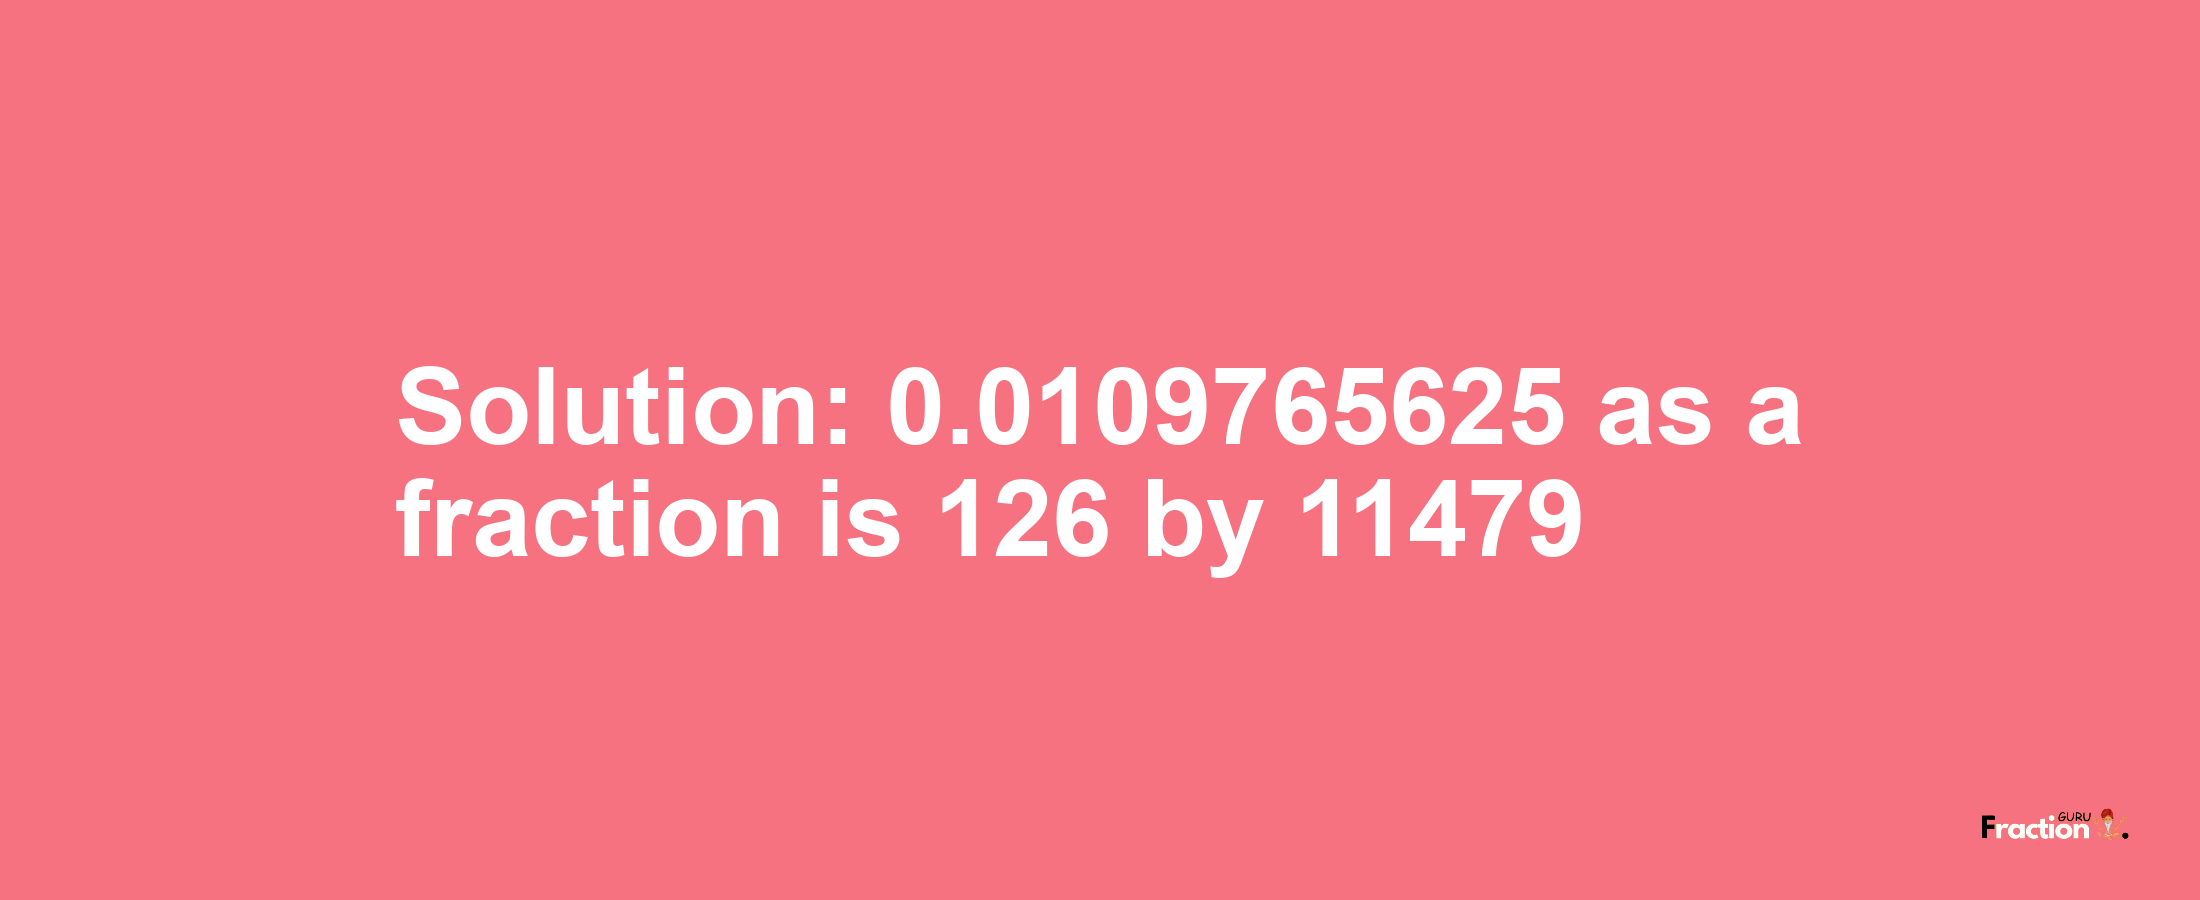 Solution:0.0109765625 as a fraction is 126/11479